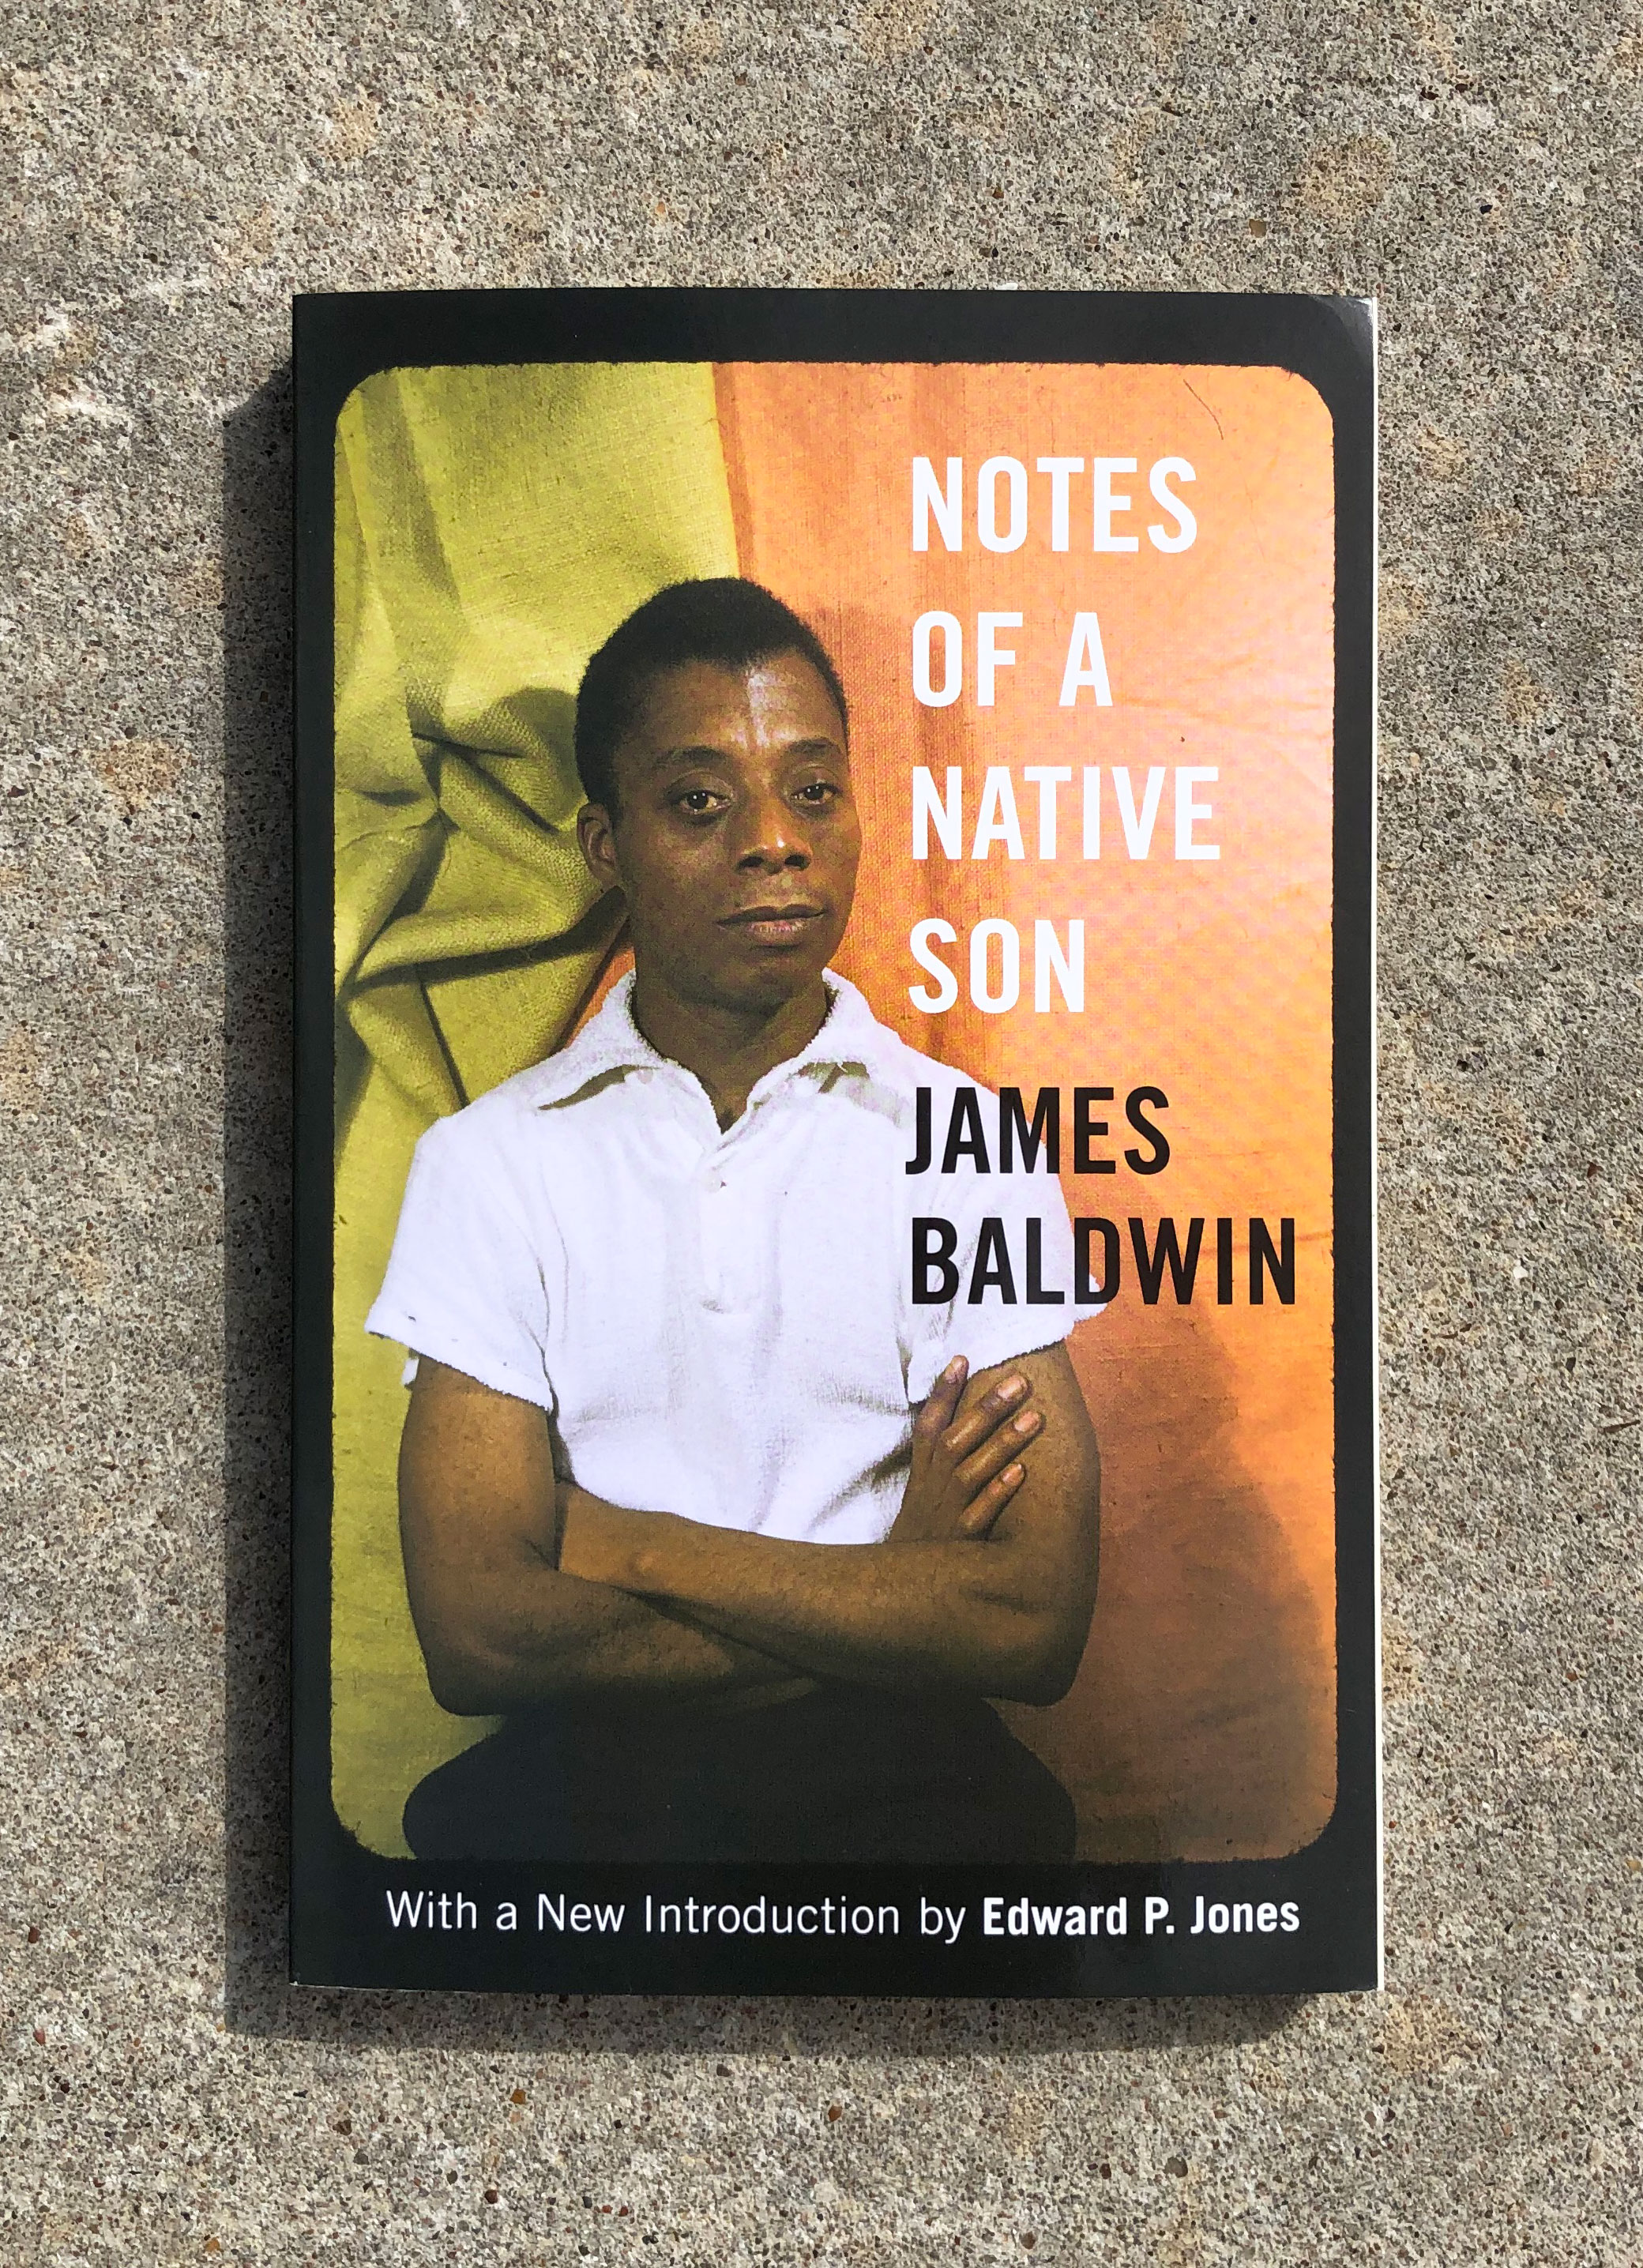 The cover the book Notes of a Native Son, showing an image of the author, and then text that reads, 1st line:  Notes of a Native Son, 2nd line: James Baldwin, at the bottom: with a new introduction by Edward P. Jones